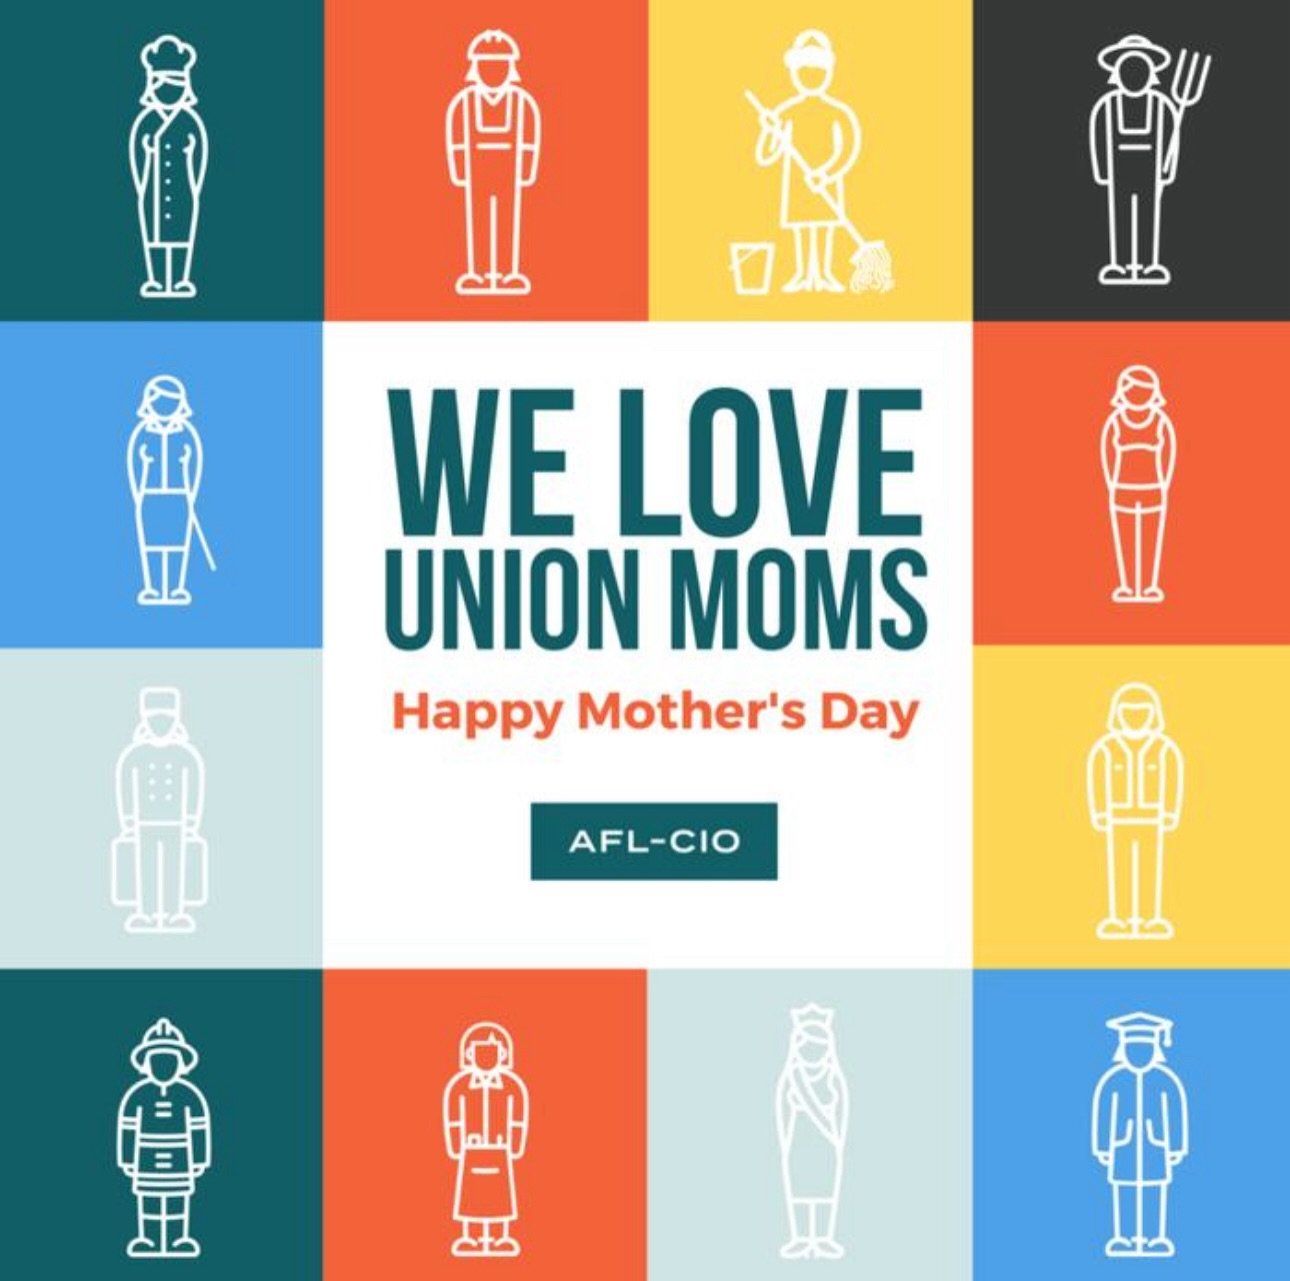 Happy Mother&rsquo;s Day from your labor union family! Today, we celebrate all the hardworking moms who give their all, both at home and in the workforce. Your dedication and strength inspire us every day. 💪🌸 #LaborUnionMoms #Solidarity #MothersDay